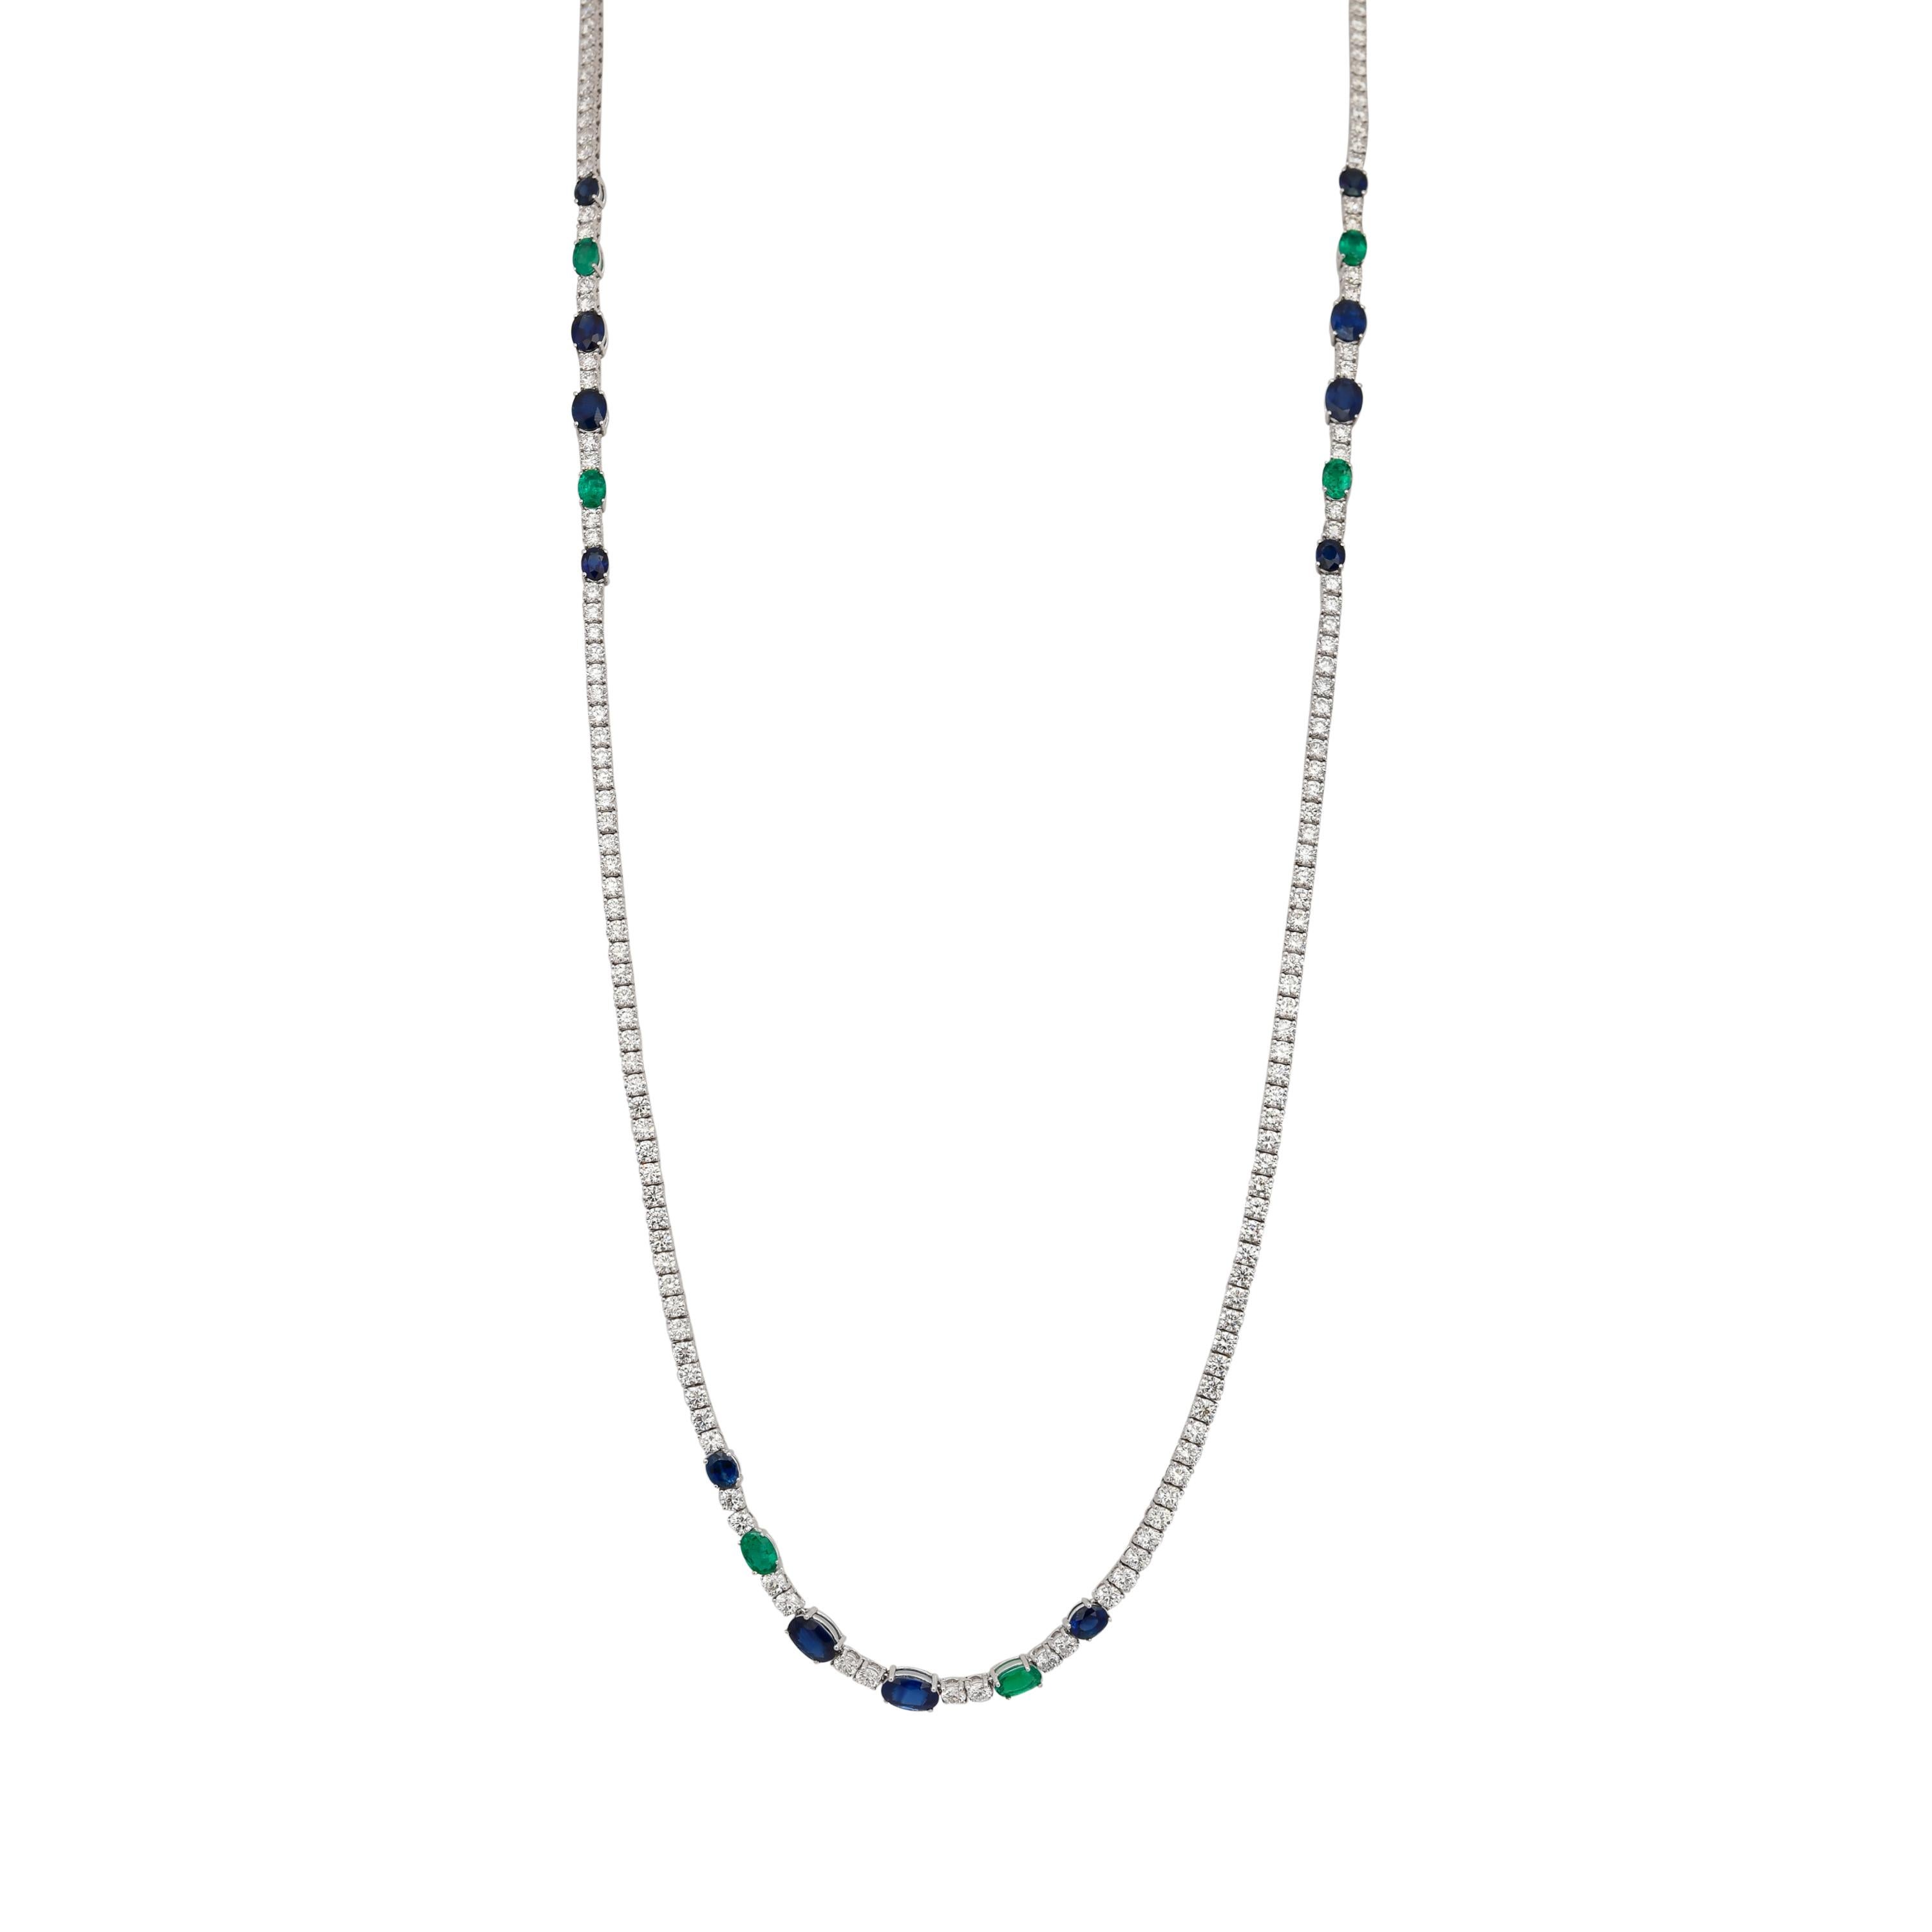 A classic long diamond necklace with a colorful twist with accents of vibrant blue sapphires and emeralds. A timeless piece that will never go out of style and will only appreciate in value over time. Exclusively by Sunita Nahata Fine